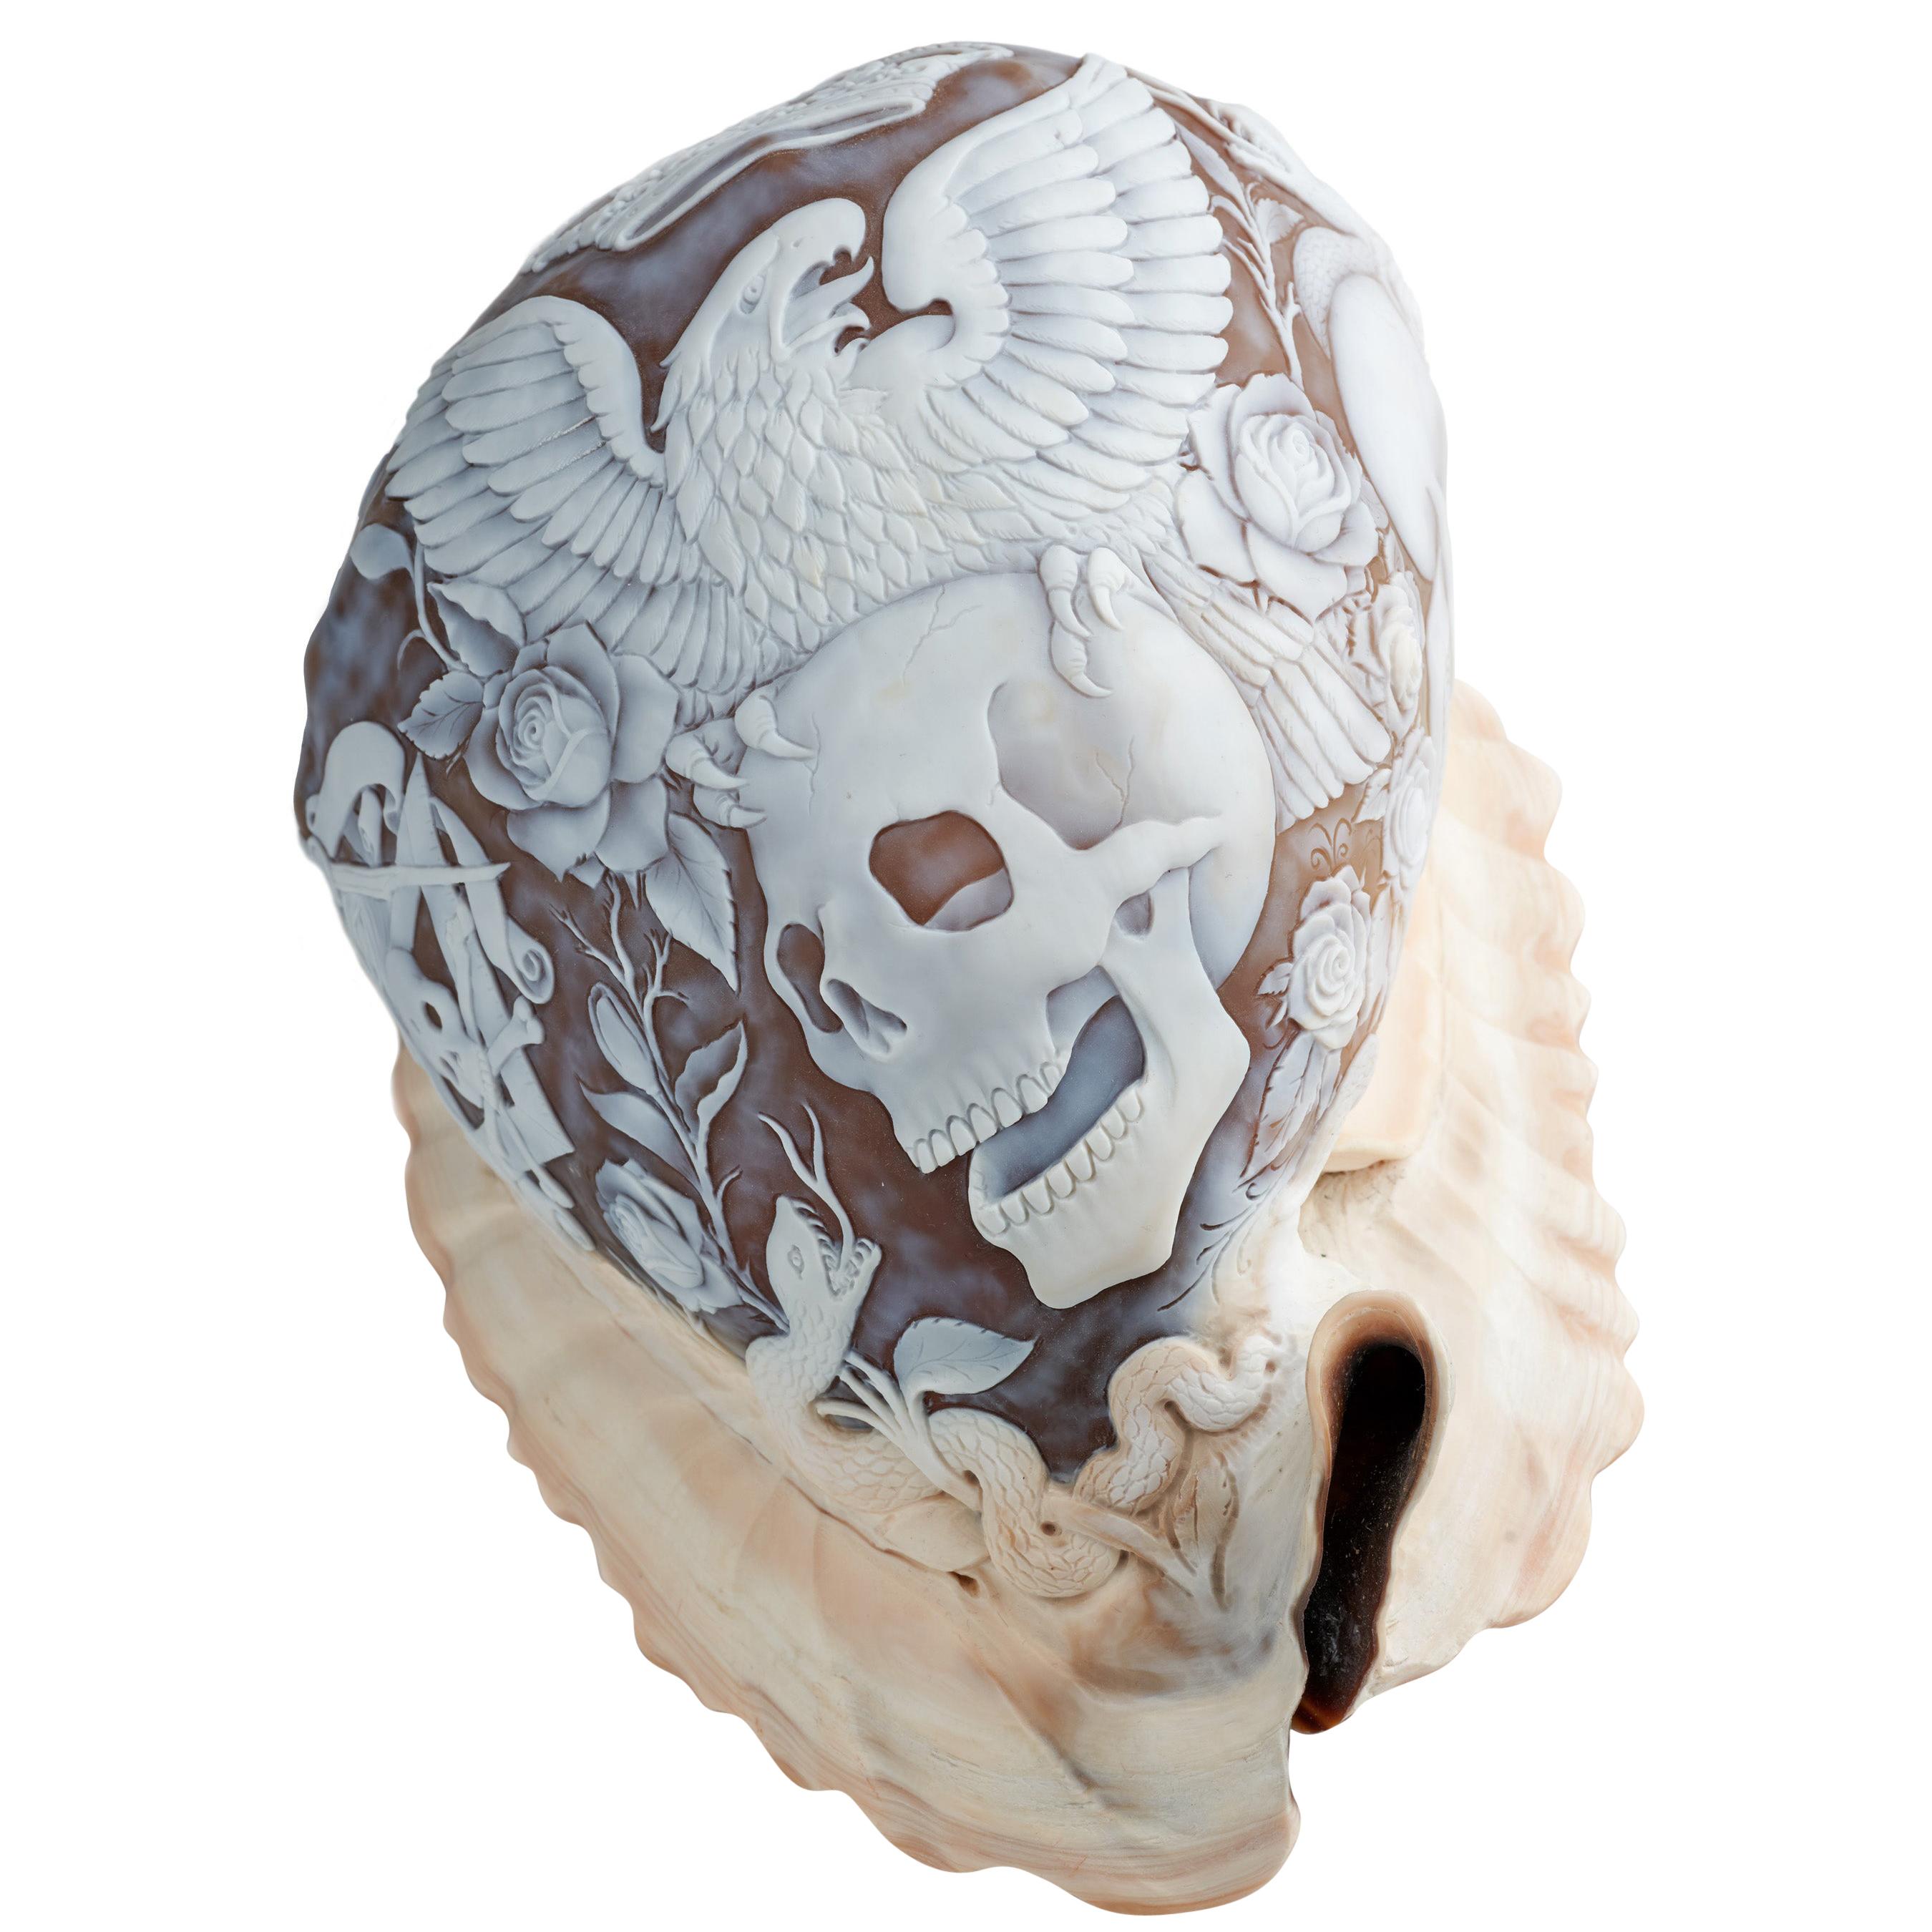 Amedeo One of a Kind "Profound Enlightenment" Conch Shell